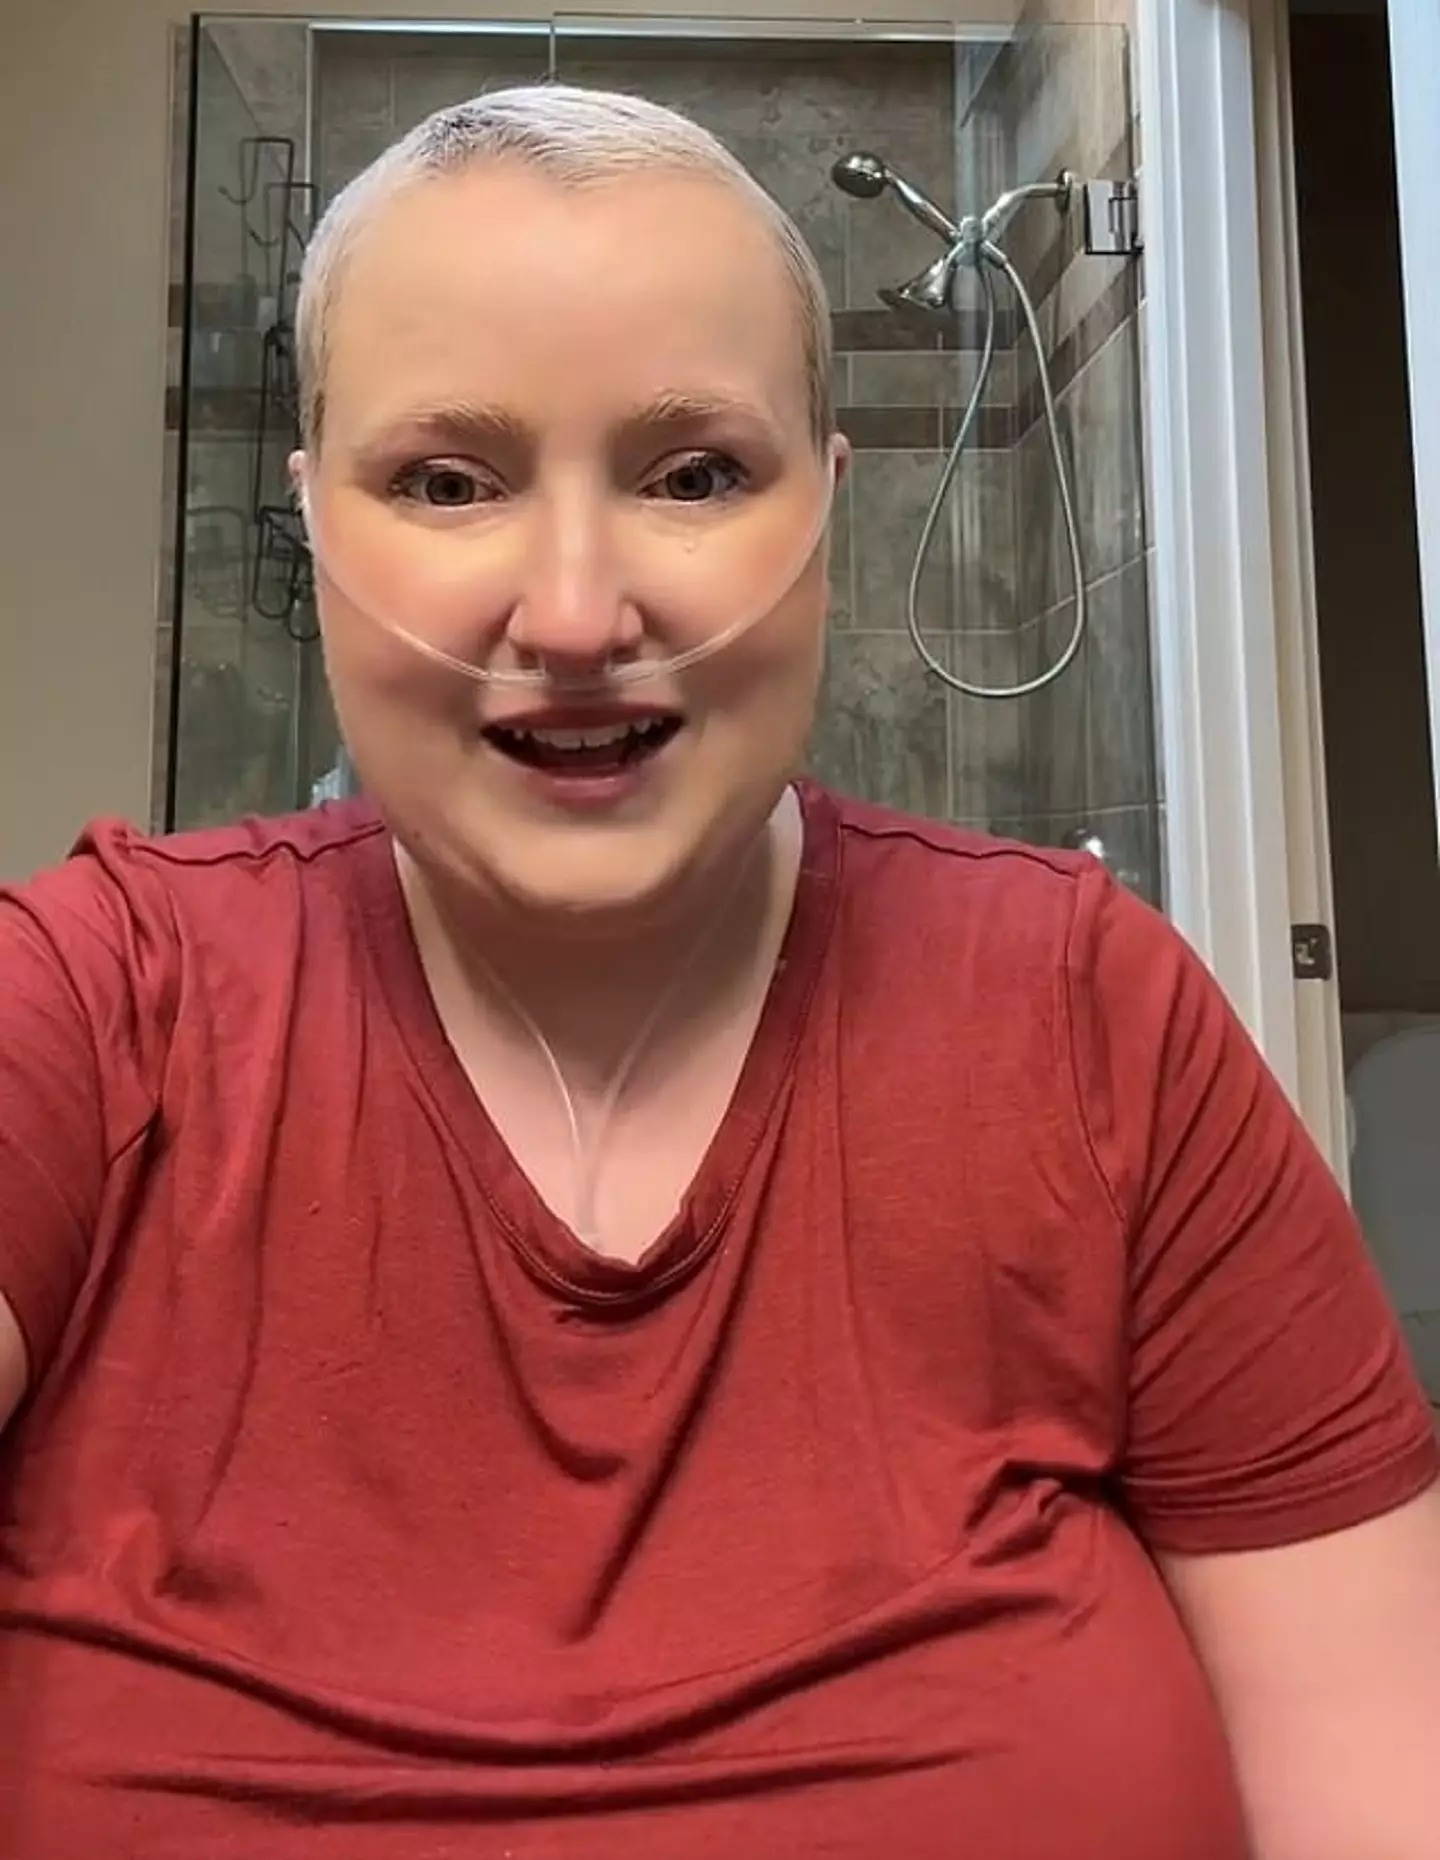 Kim told people if they were seeing the video it meant she had died. (TikTok/@cancerpatientmd)